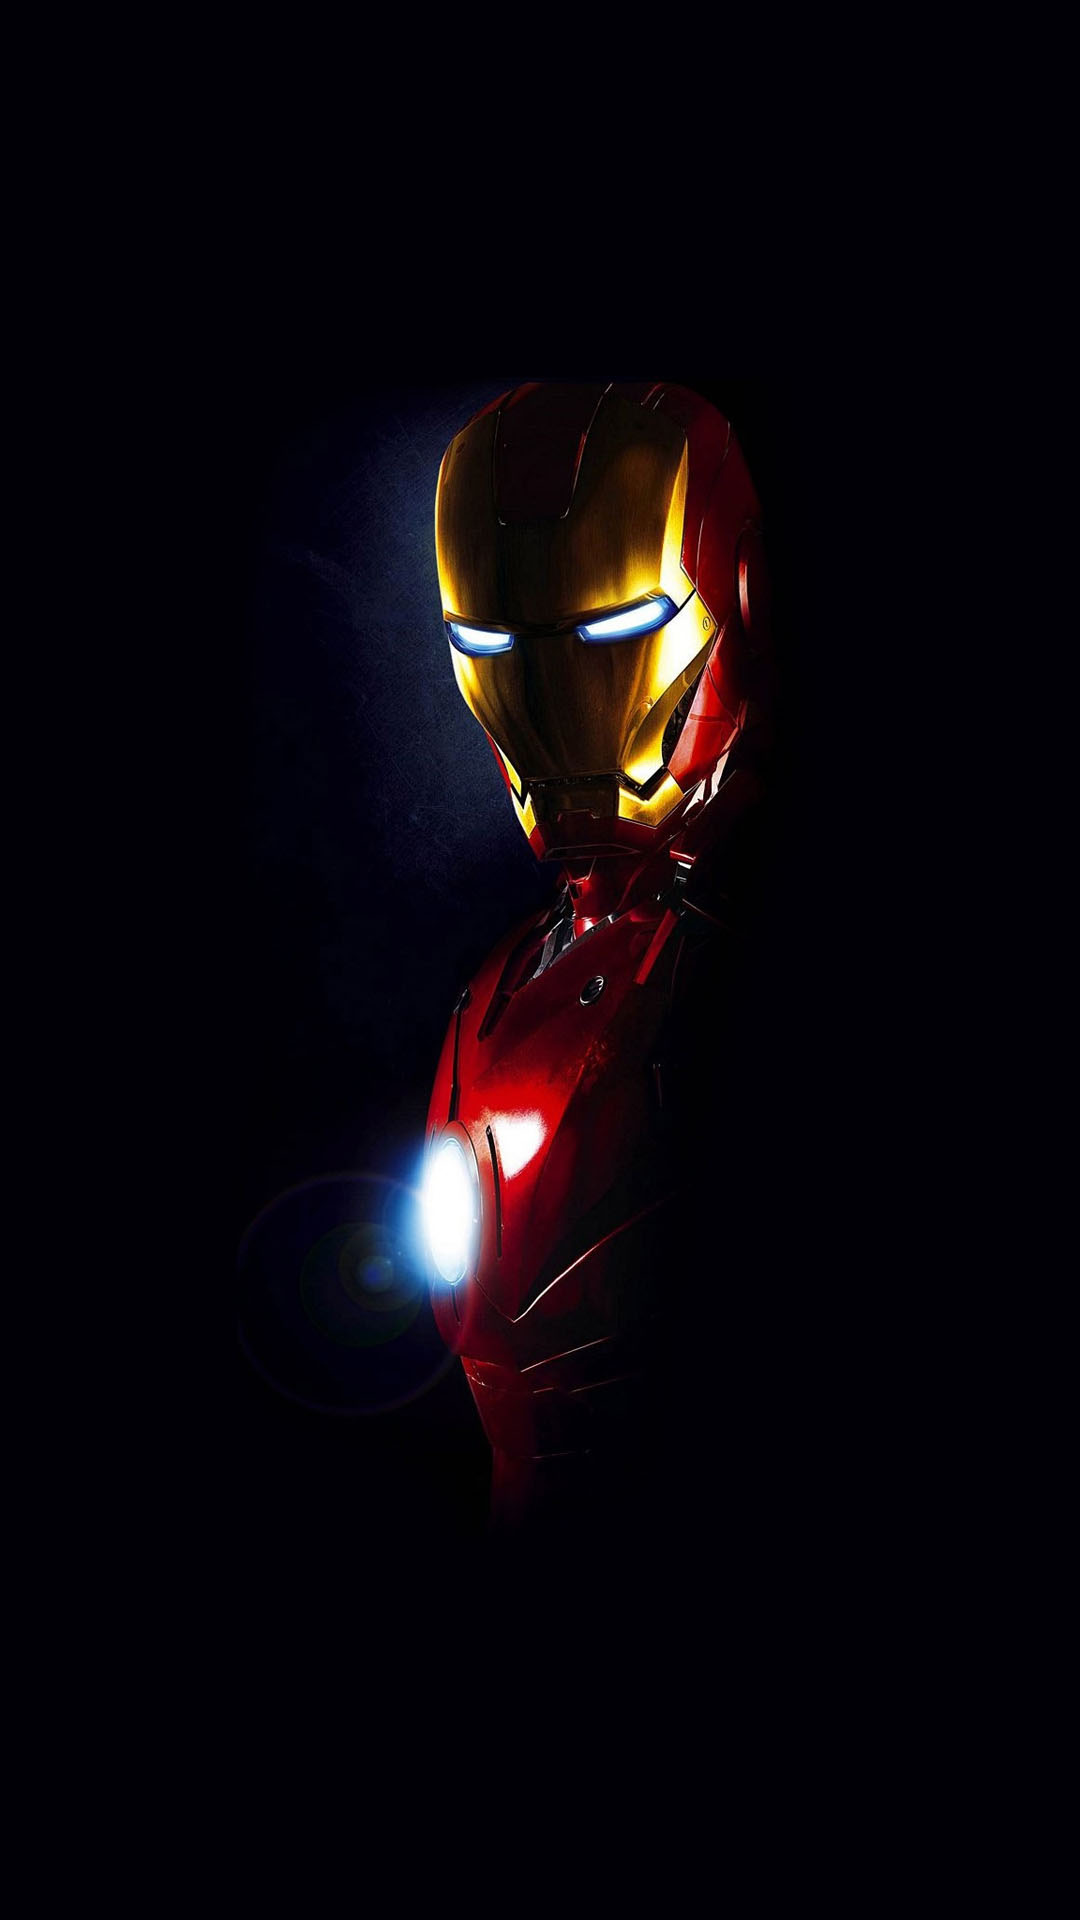 Htc One M8 Wallpaper Iron Man Android